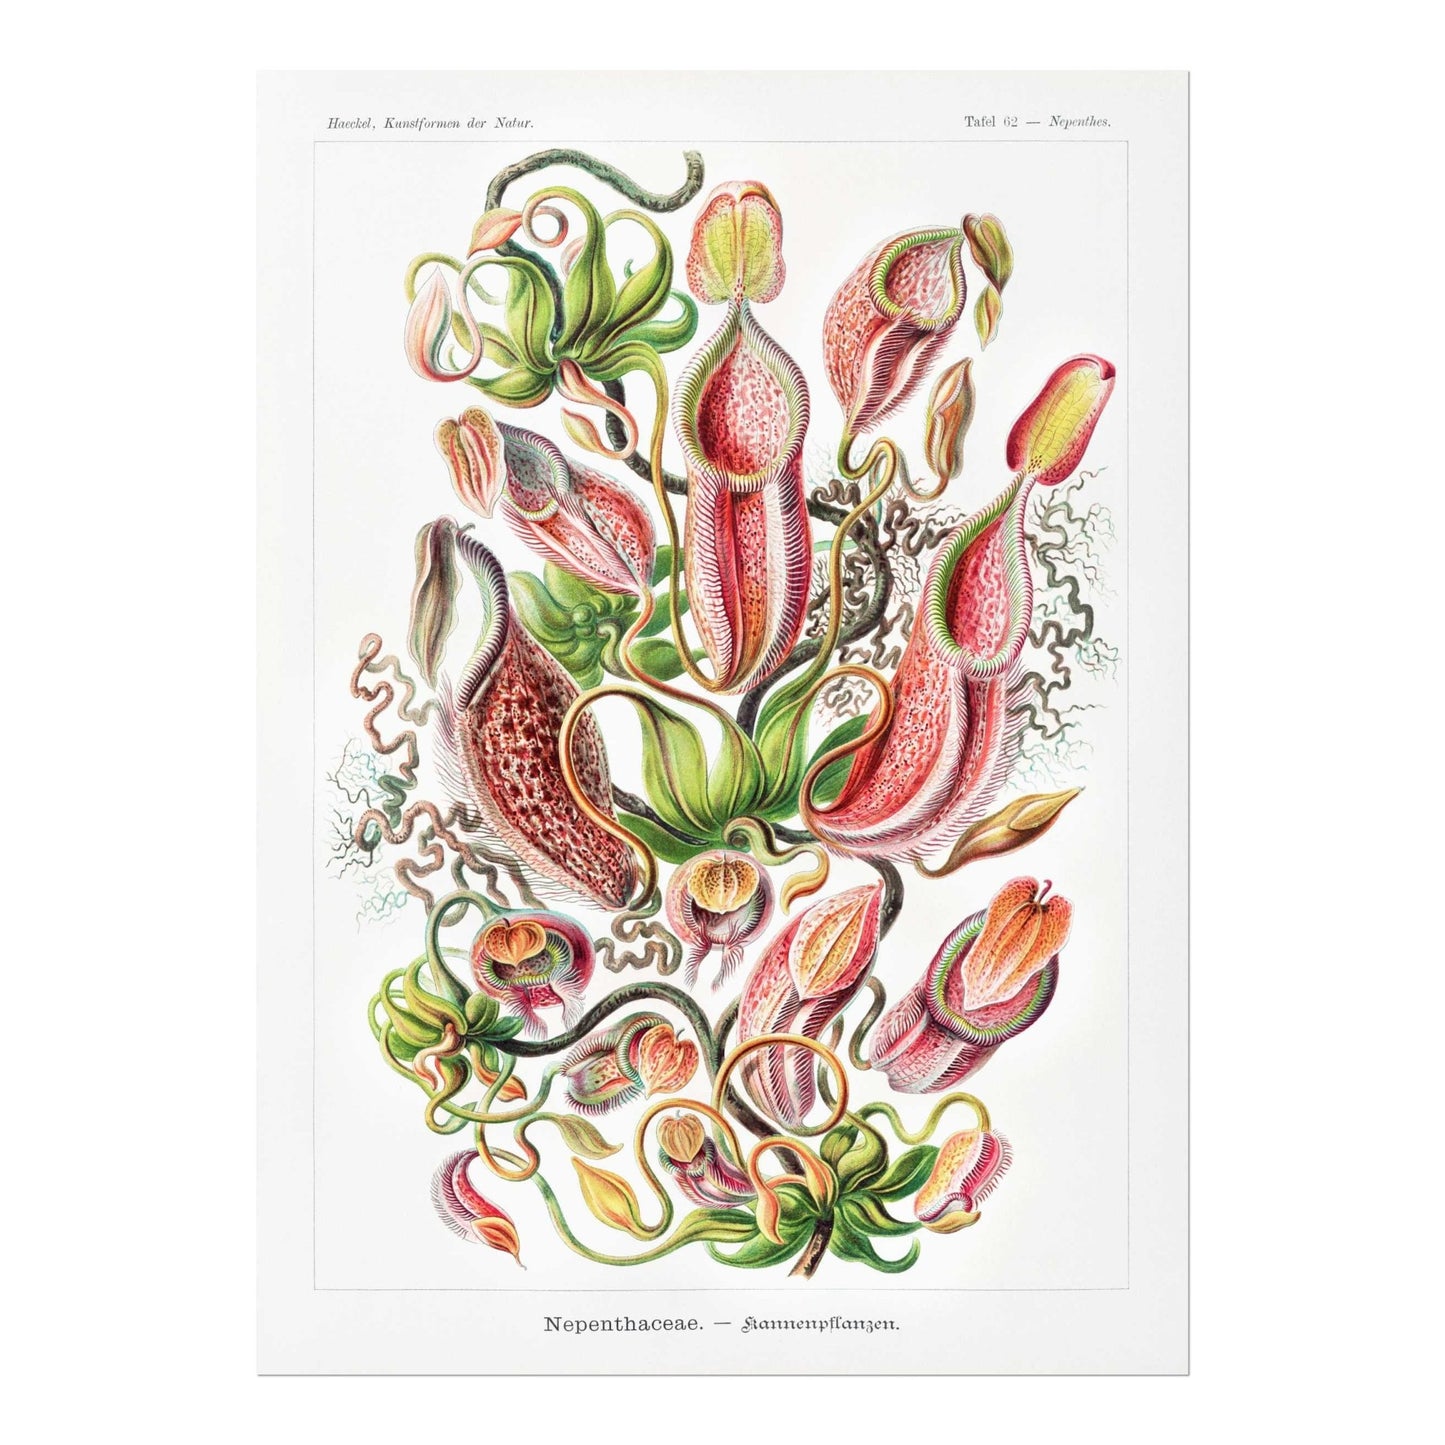 ERNST HAECKEL - Tropical Pitcher Plants (Nepenthaceae)